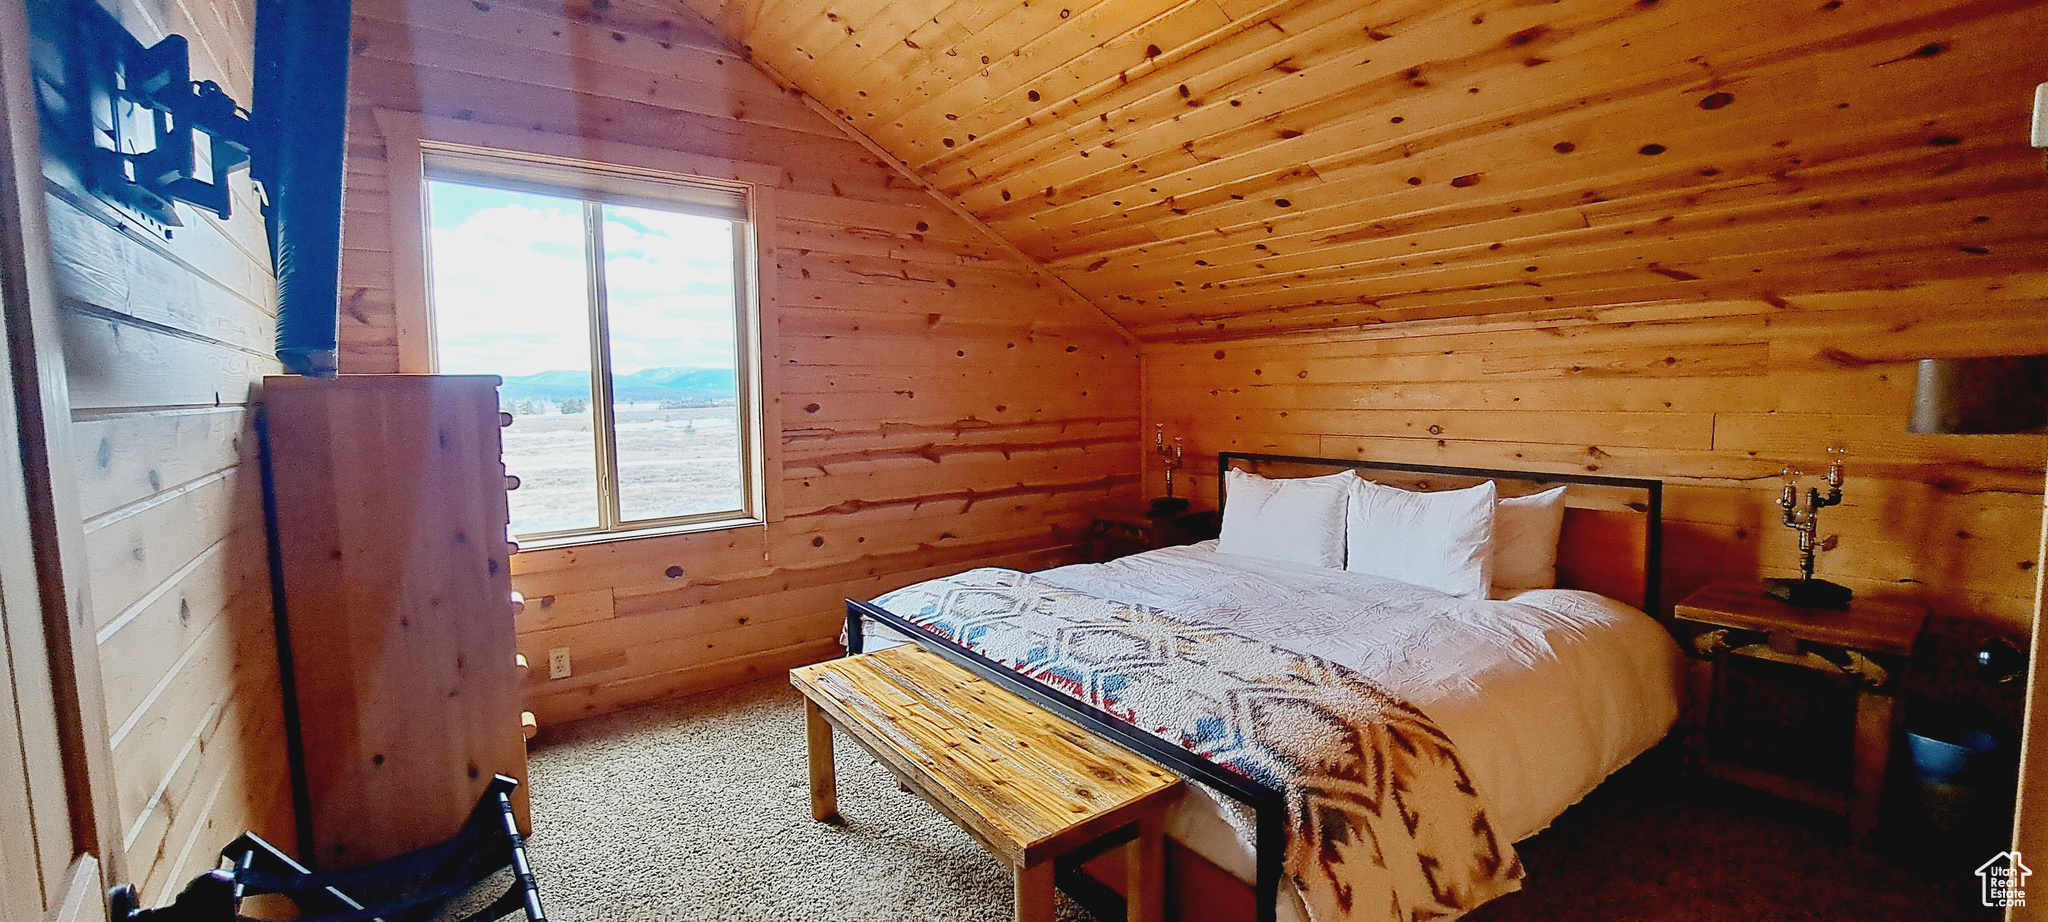 Bedroom with wooden ceiling, vaulted ceiling, and multiple windows